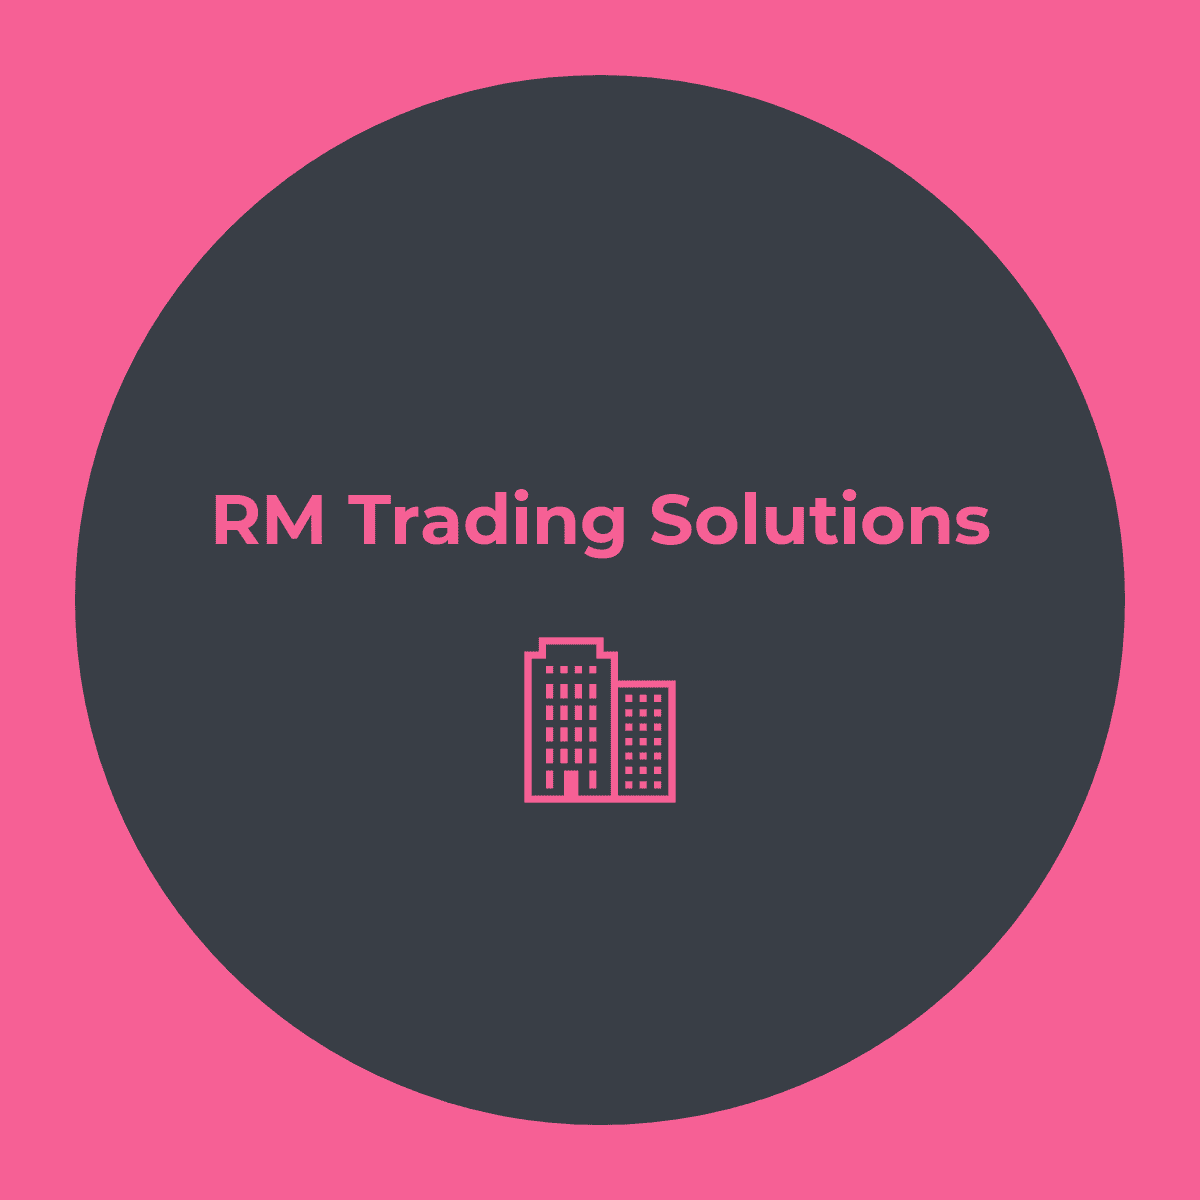 RM Trading Solutions